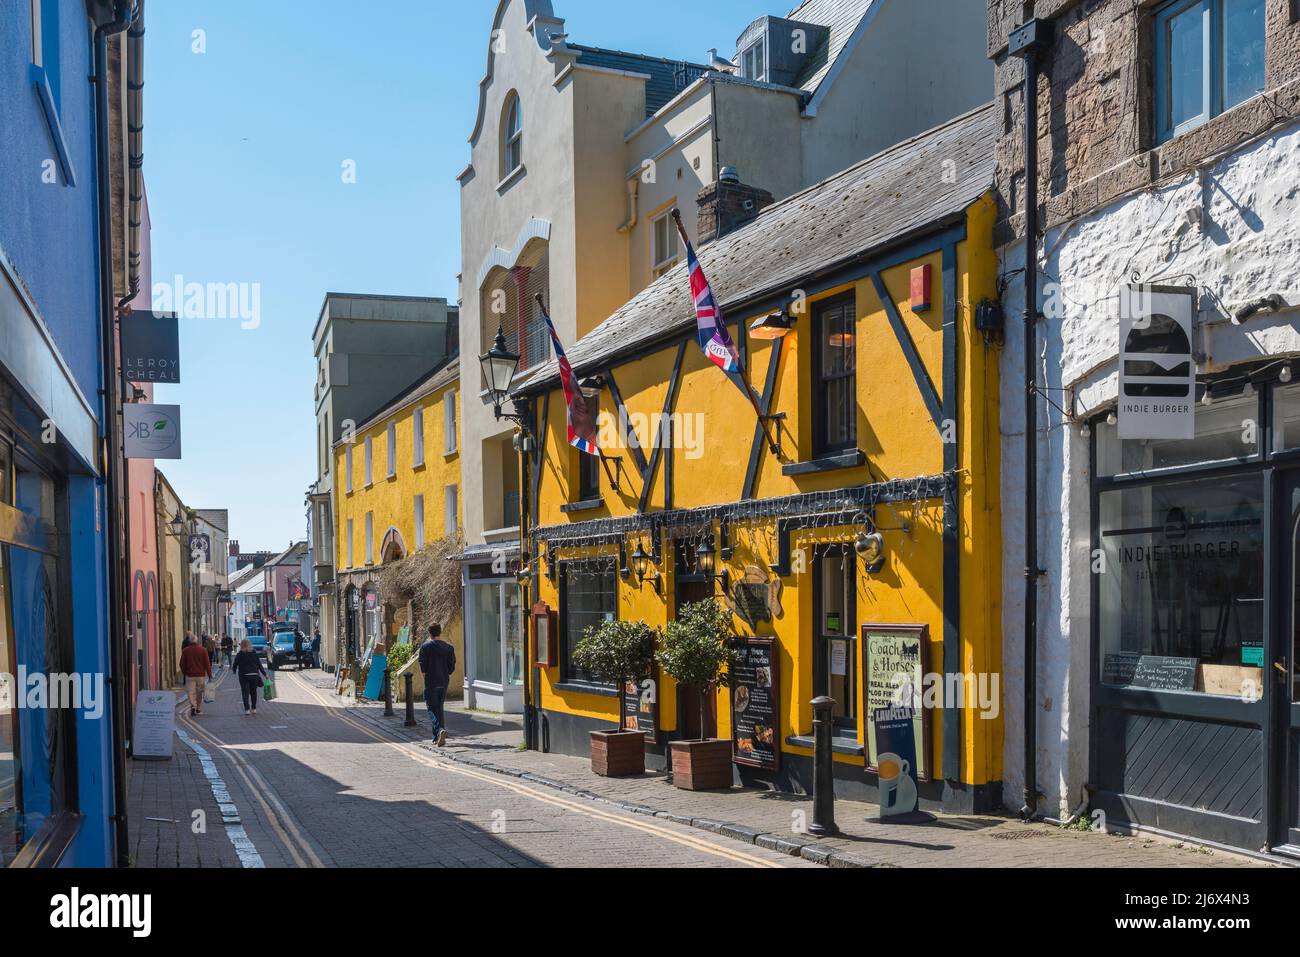 Tenby town centre, view of colourful shops in Upper Frog Street in the historic seaside town of Tenby, Pembrokeshire, Wales, UK Stock Photo